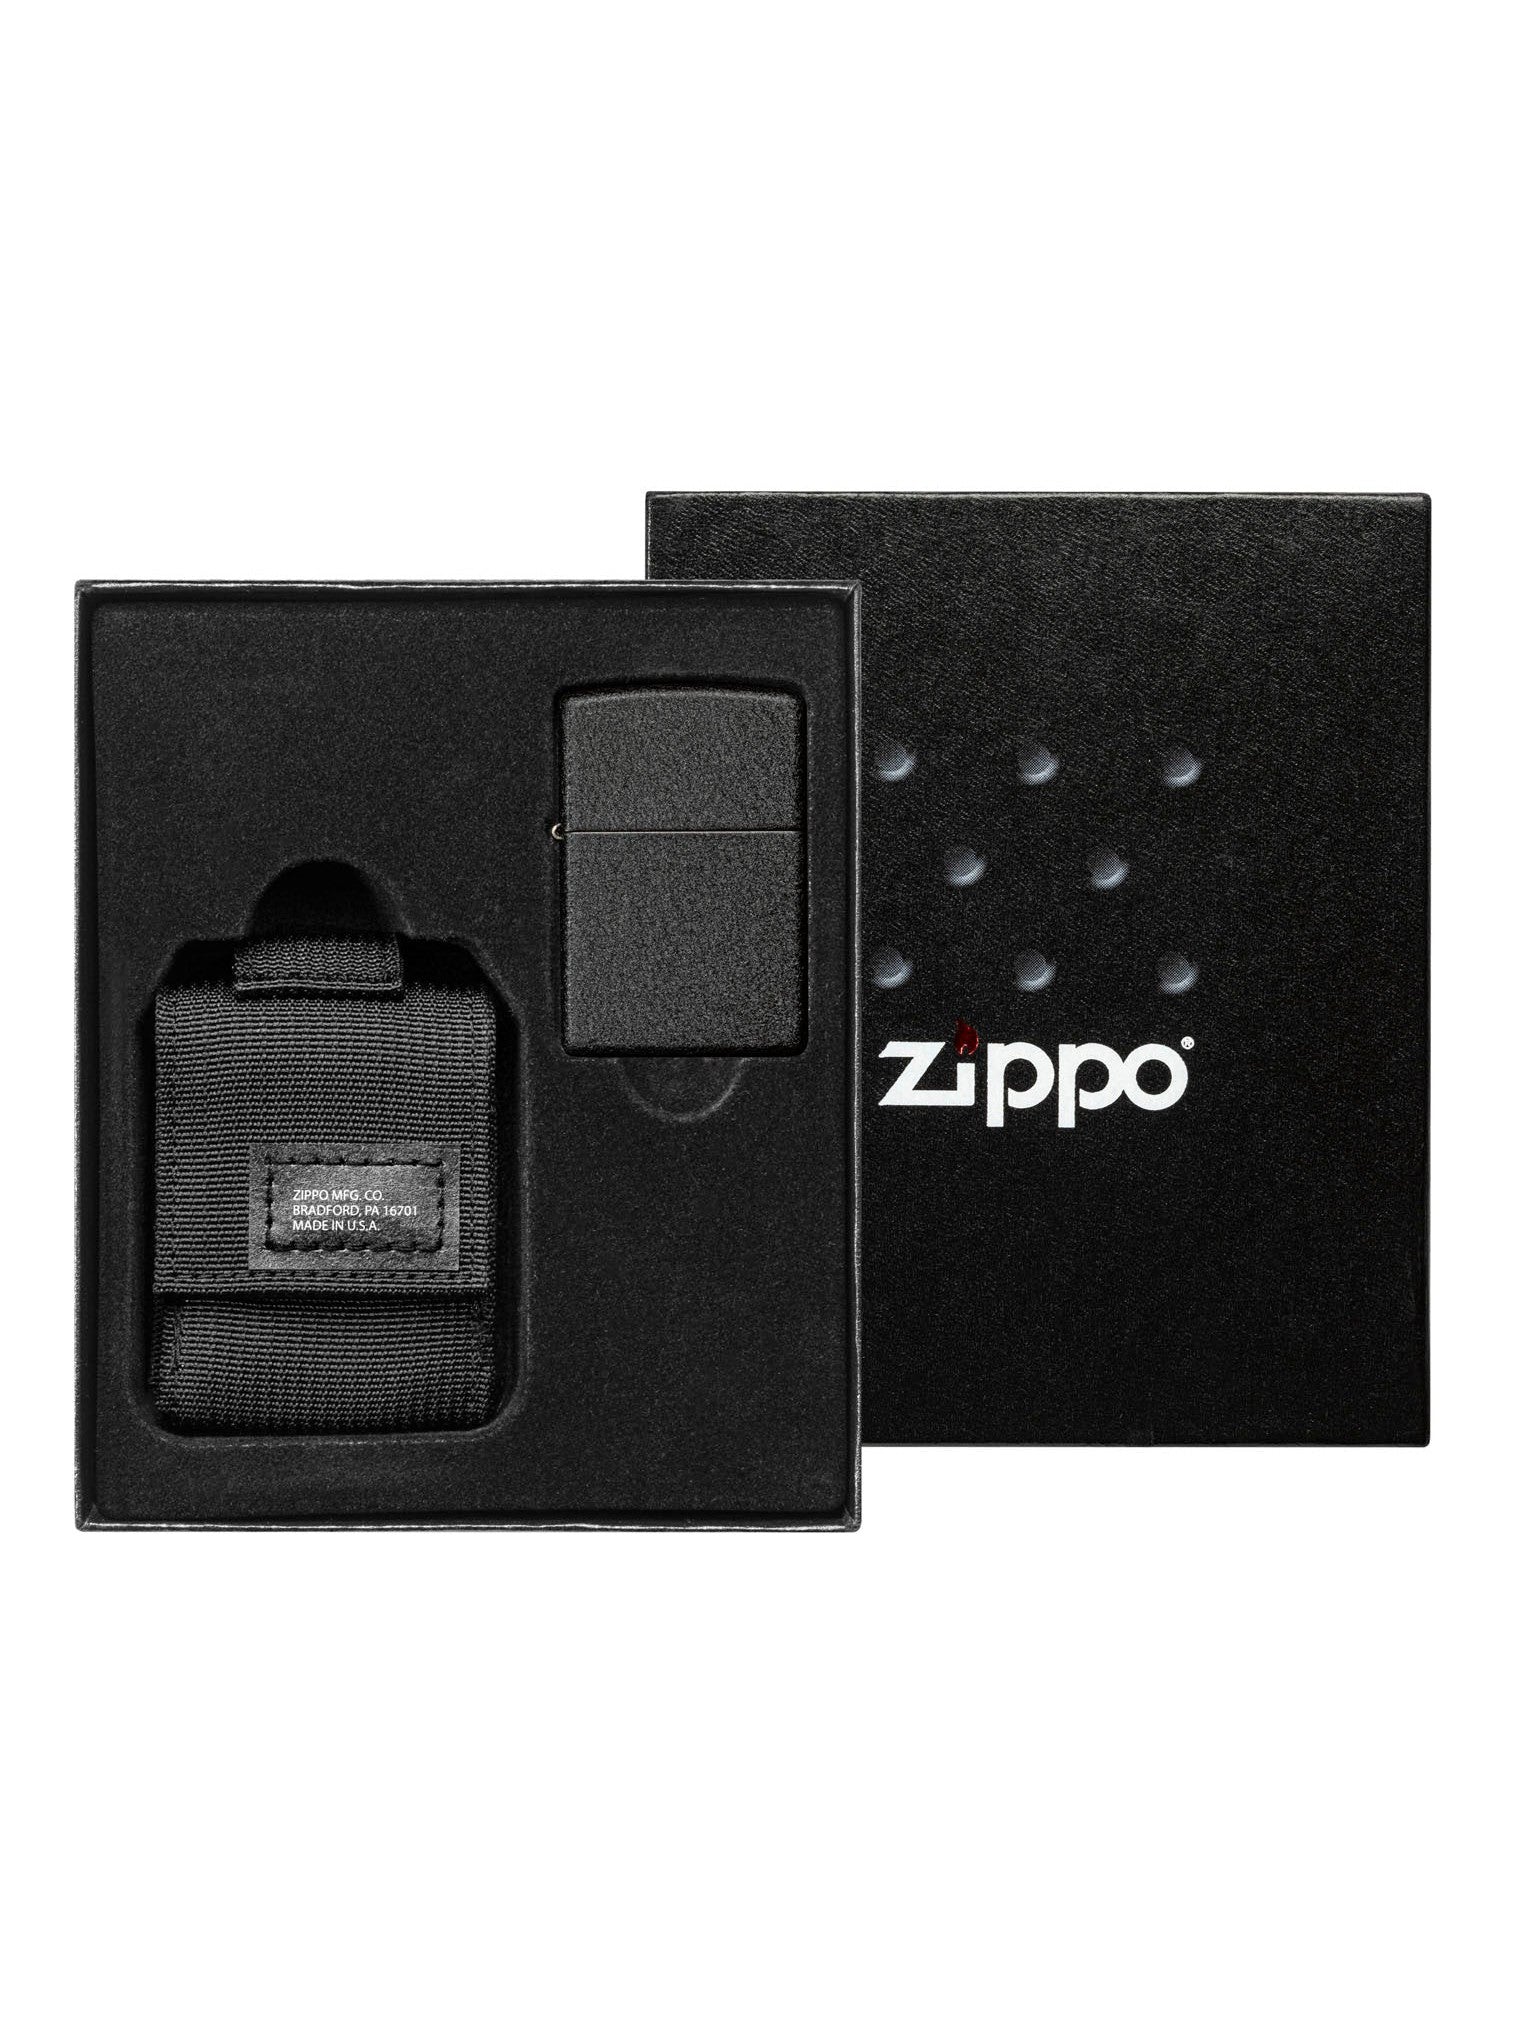 Zippo Black Crackle Lighter and Black MOLLE Pouch - 49402